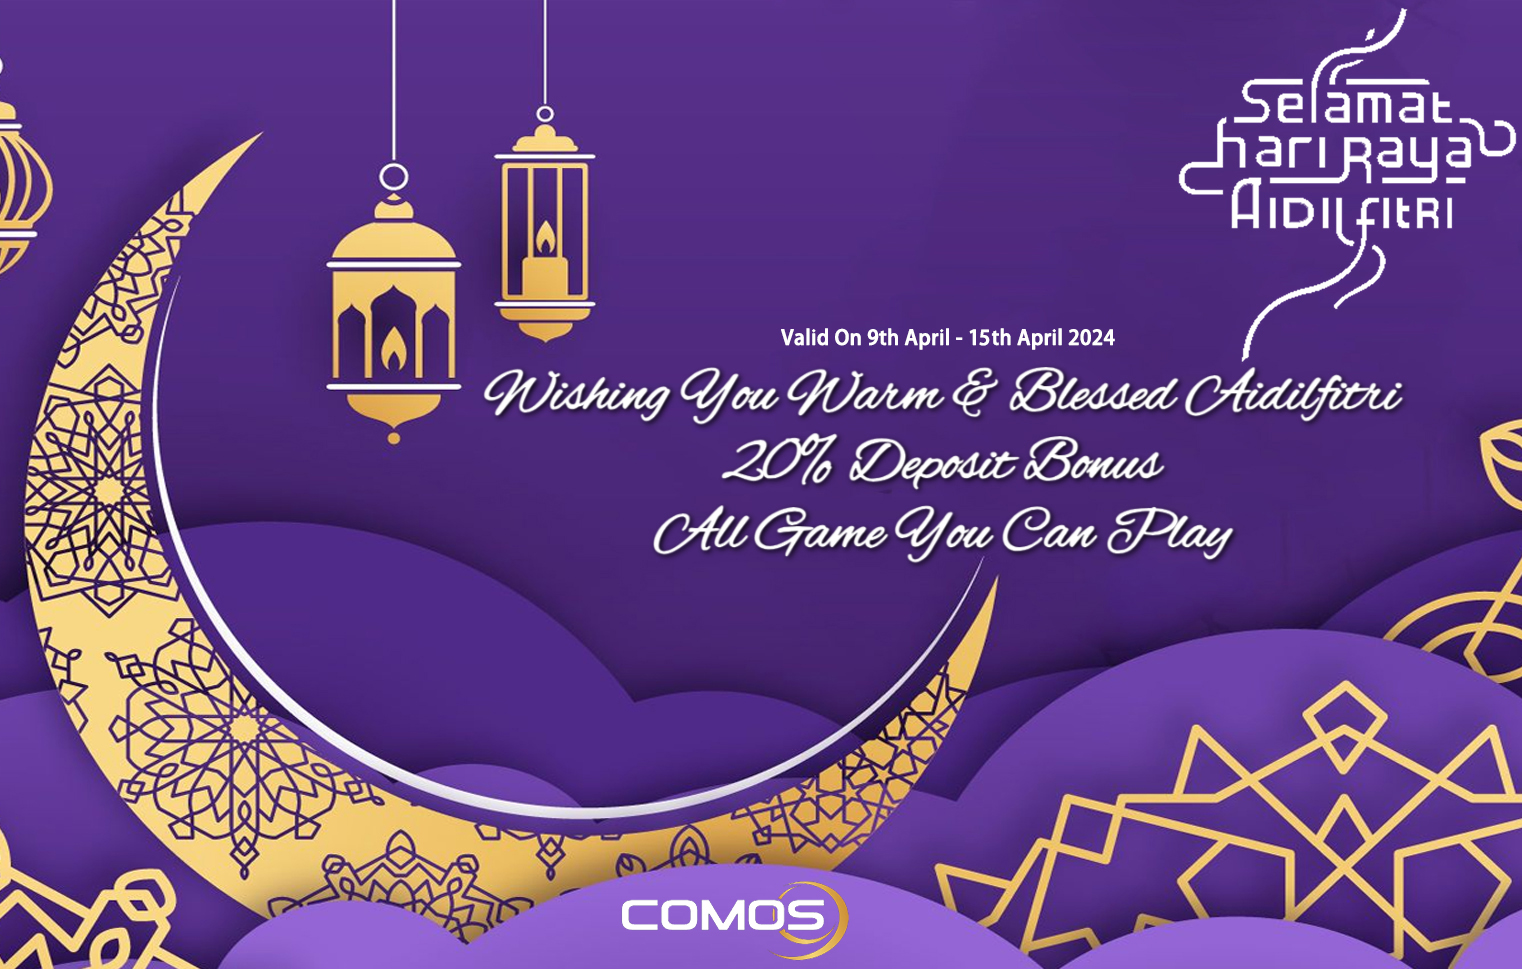 Wishing You Warm & Blessed Aidilfitri 20% Deposit Bonus All Game You Can Play ( Valid On 9th April - 15th April 2024 )